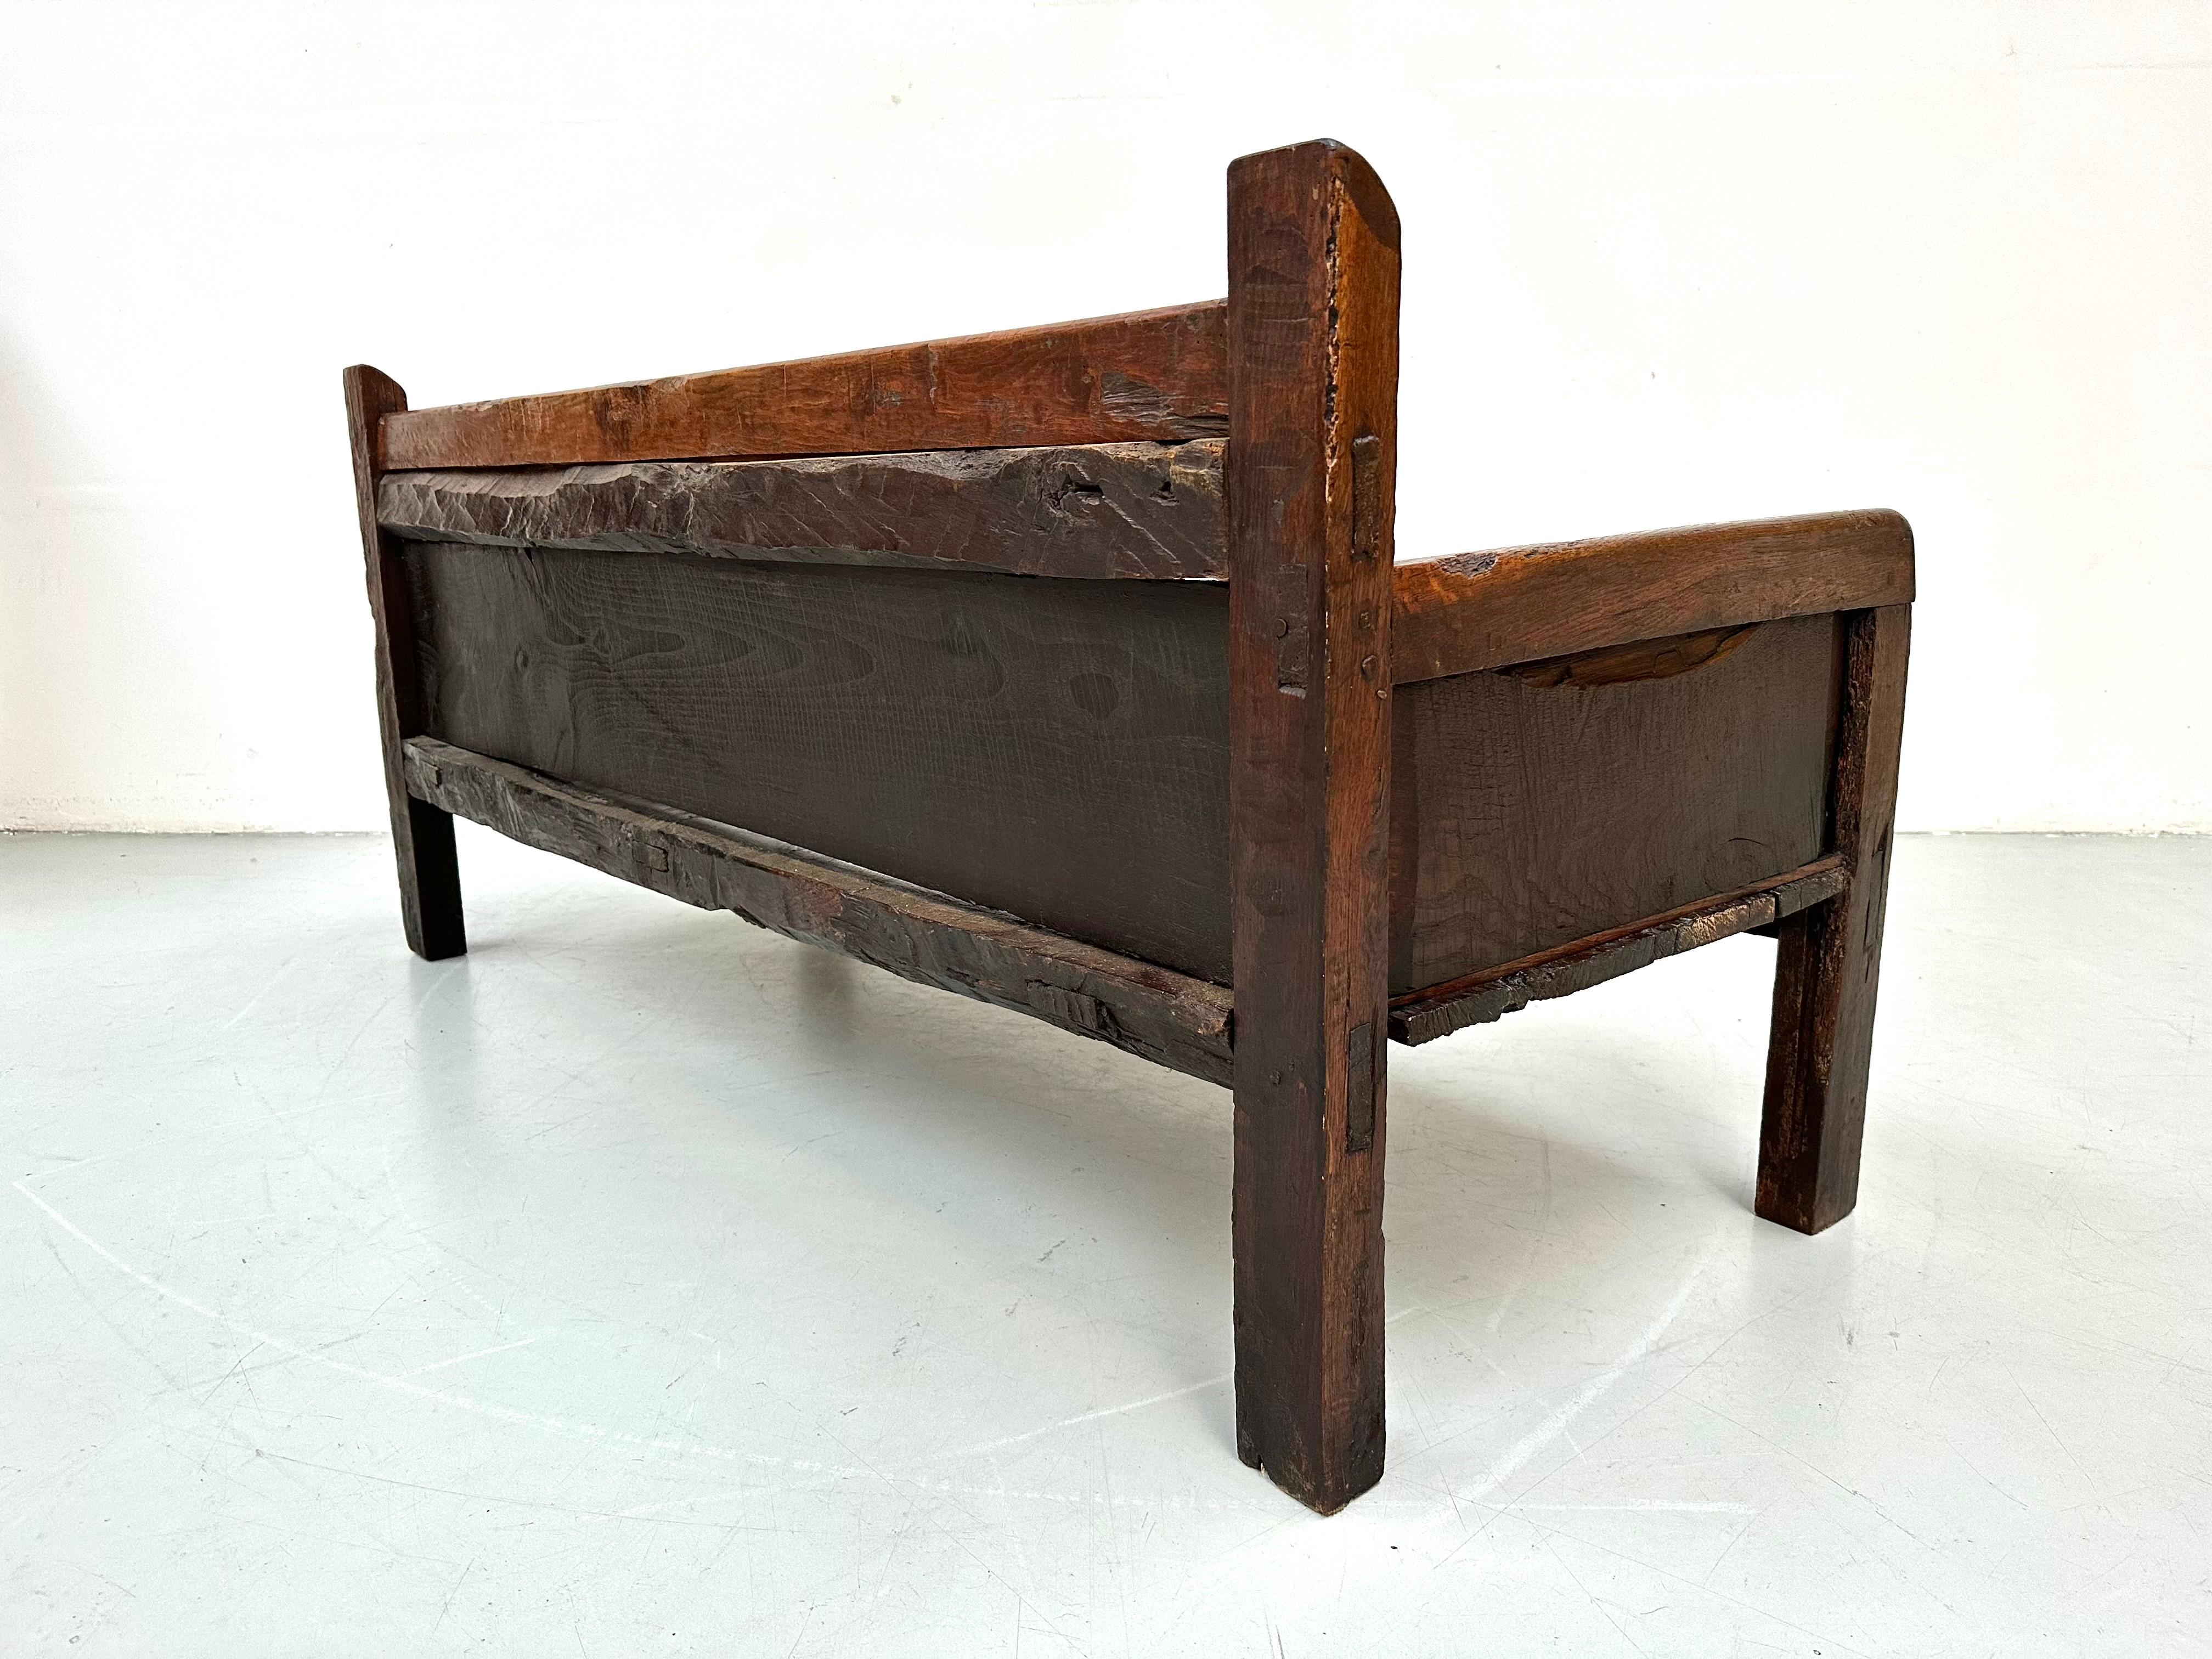 Antique Handmade Minimalistic Spanish Chestnut Wood Bench, Early 19th Century For Sale 13